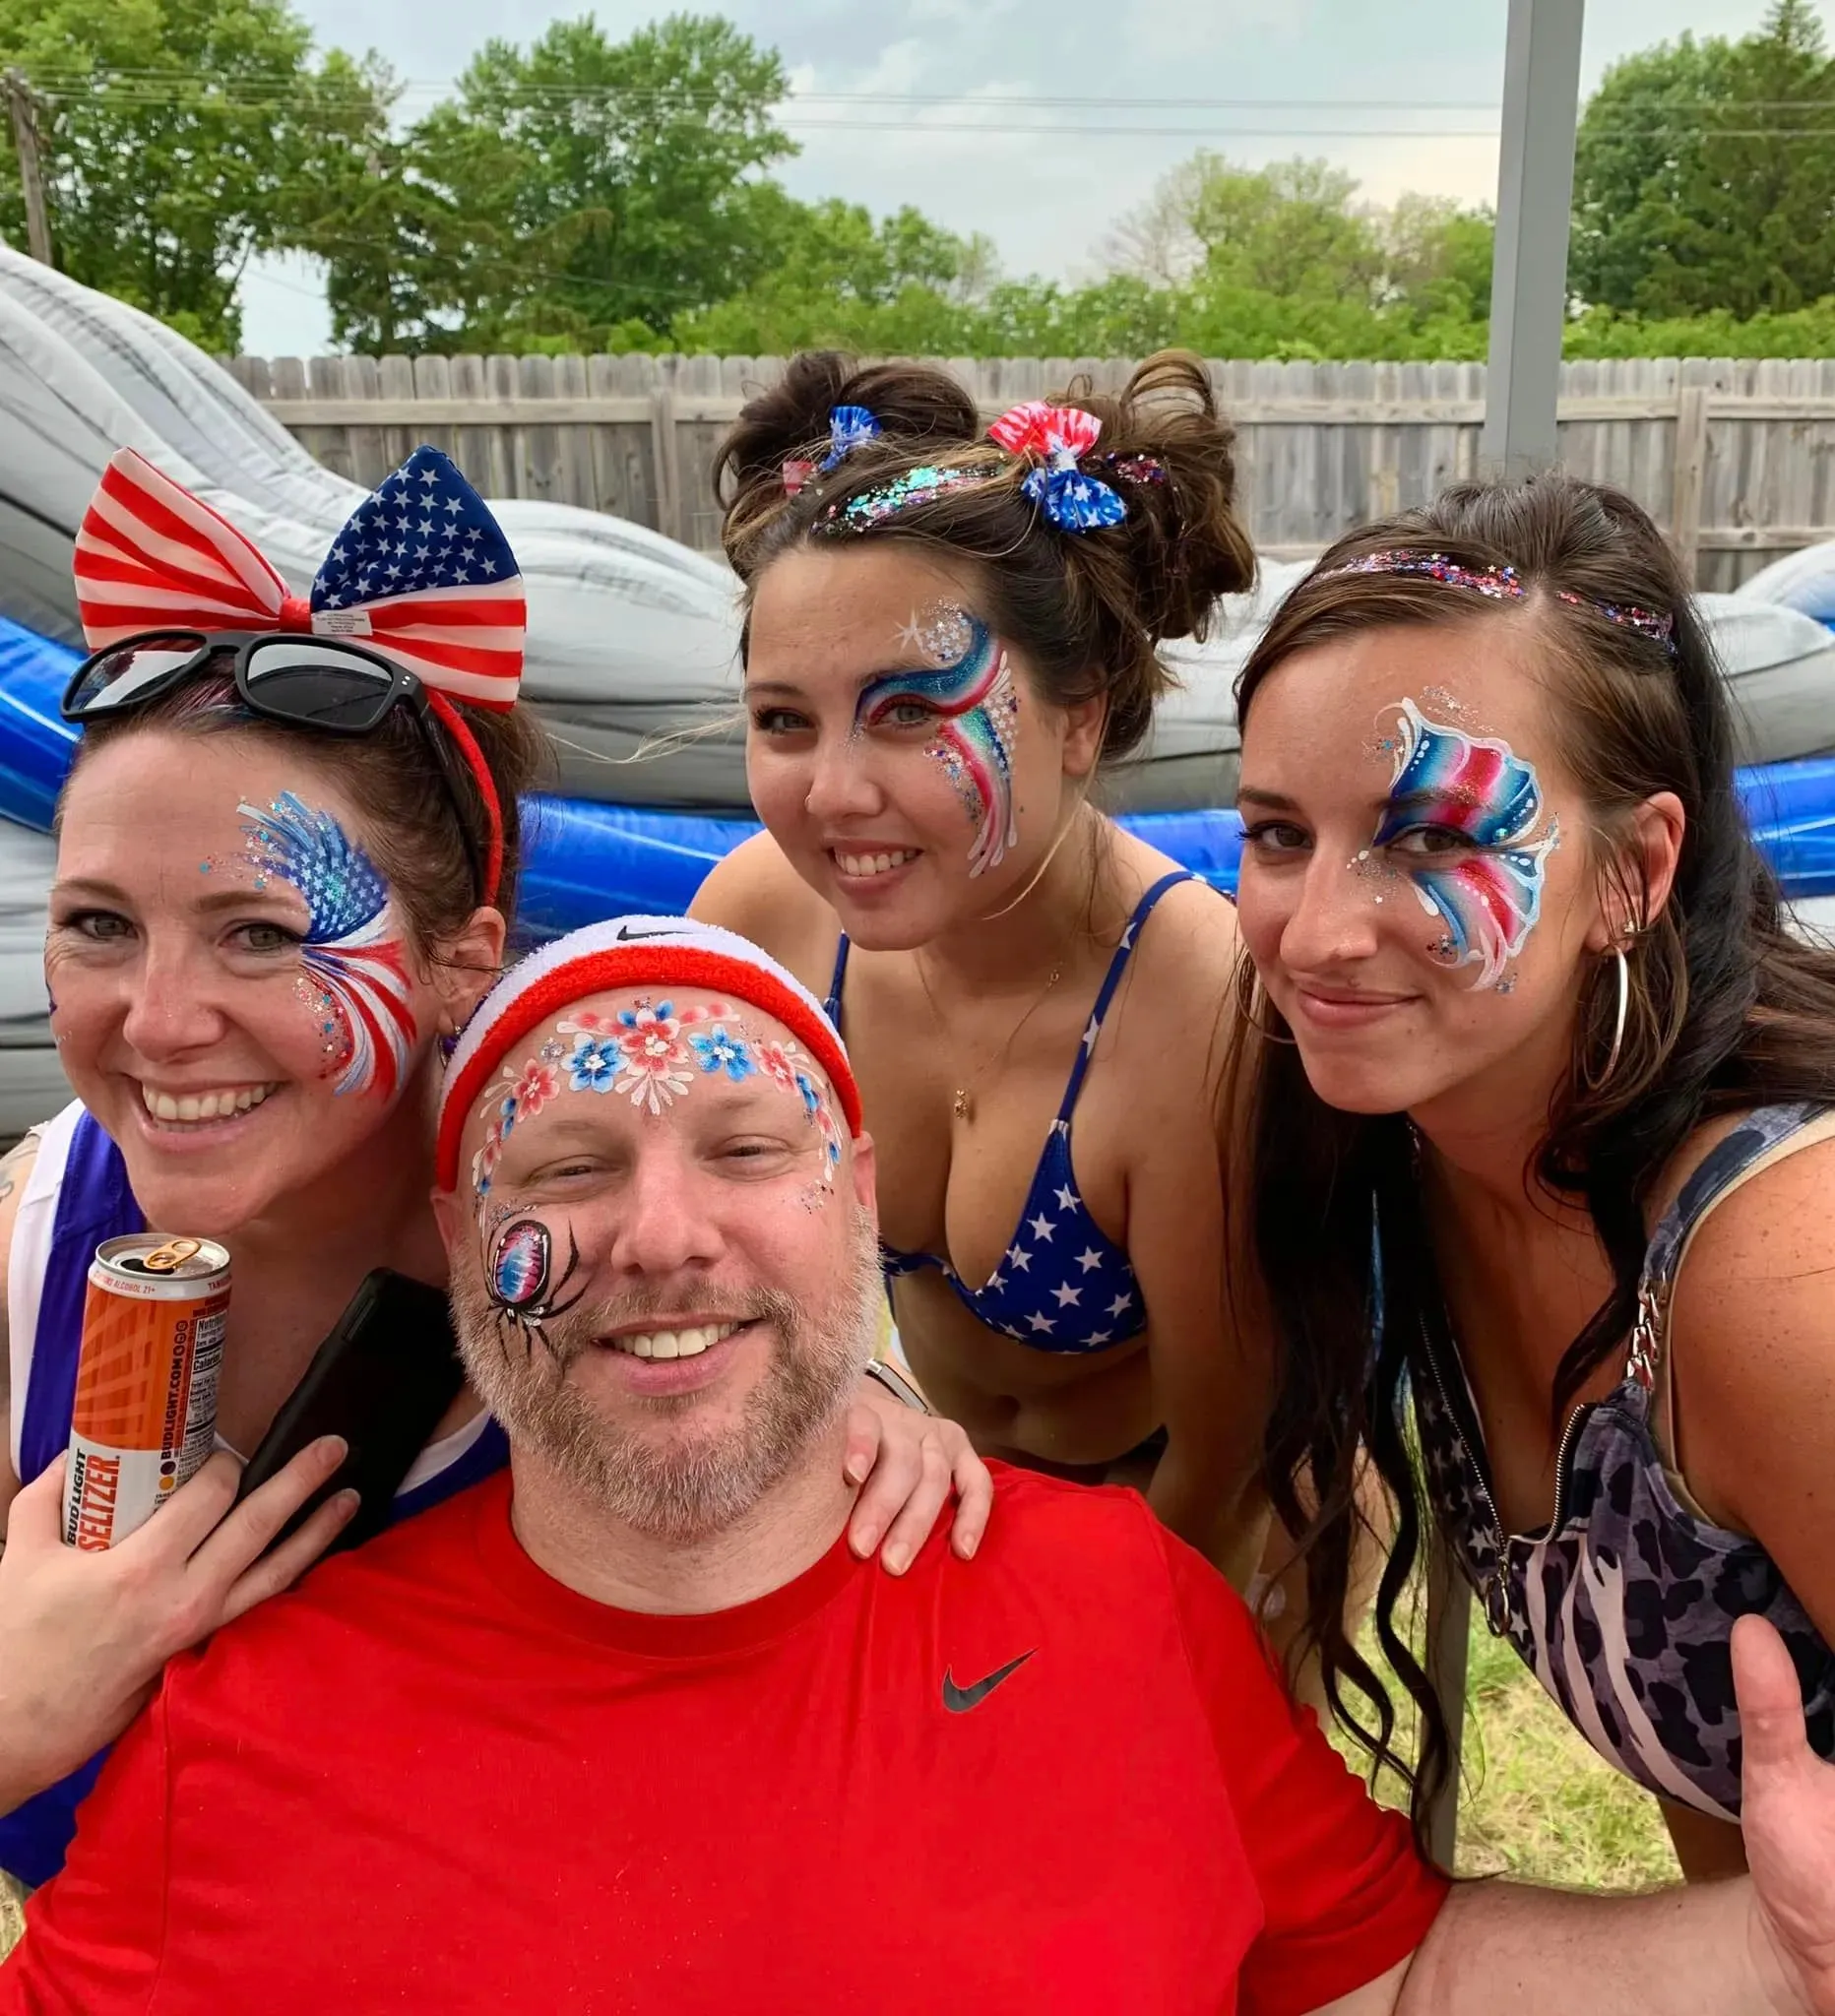 group with 4th of july waterproof glitter tattoos and face paint